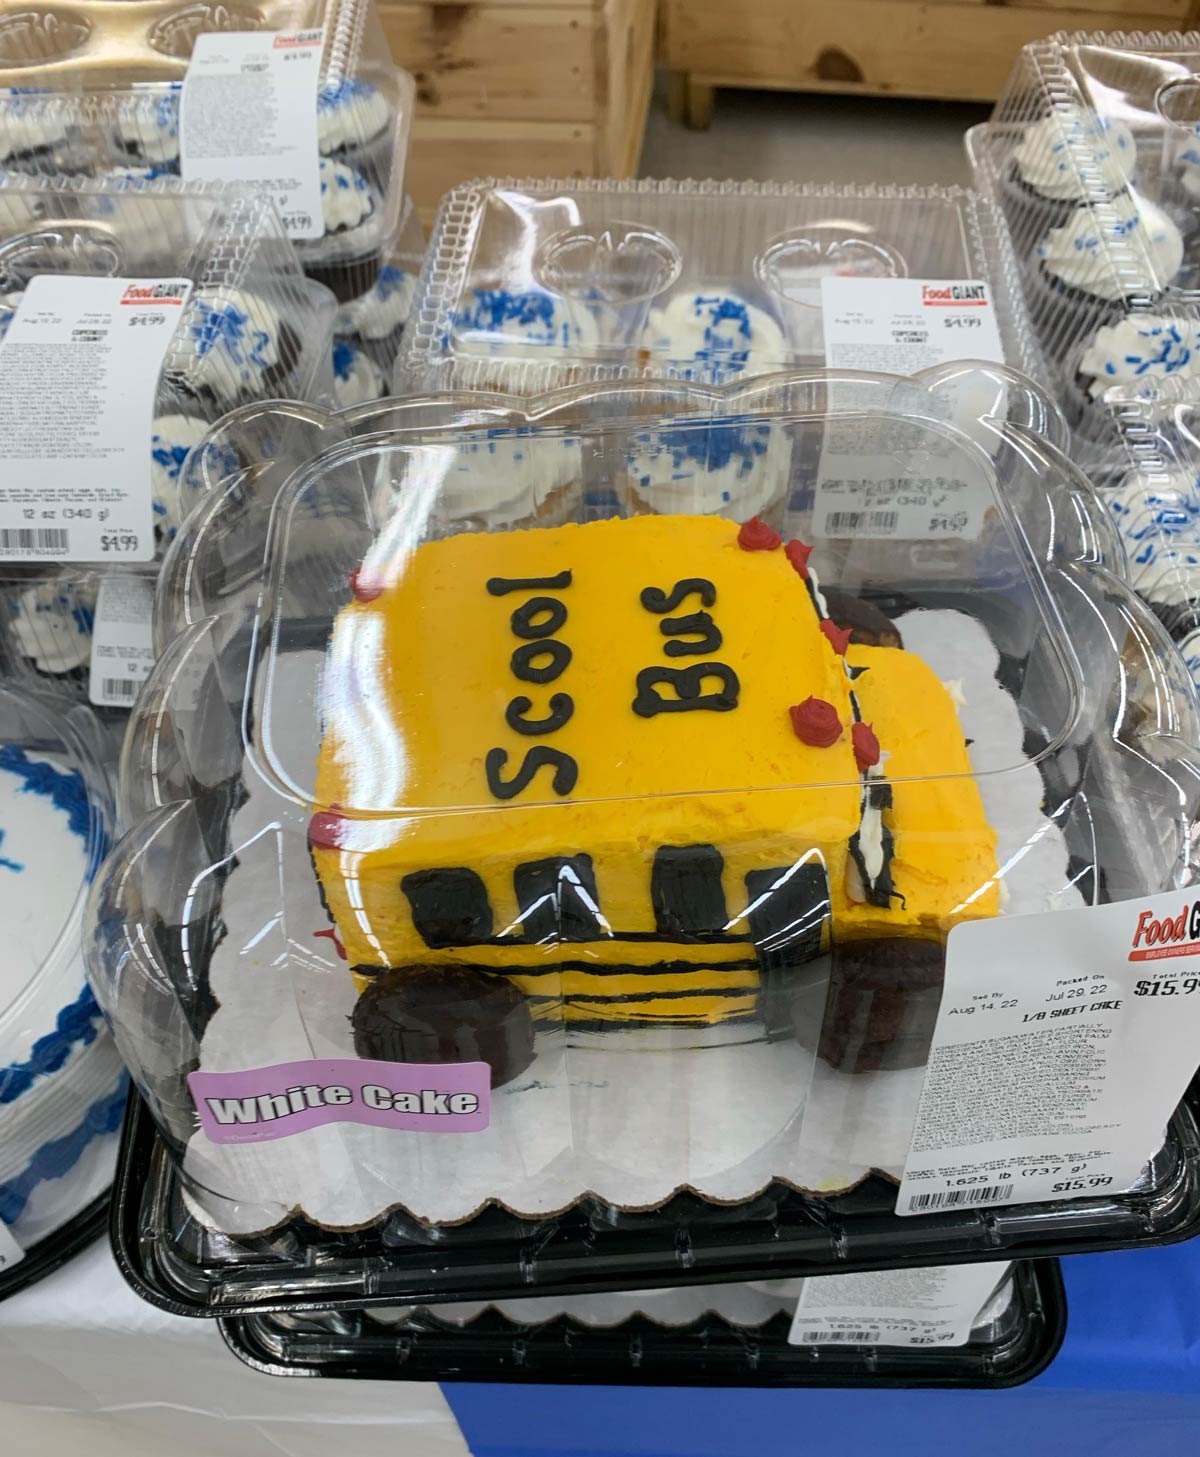 Found this cake at a bakery the other day